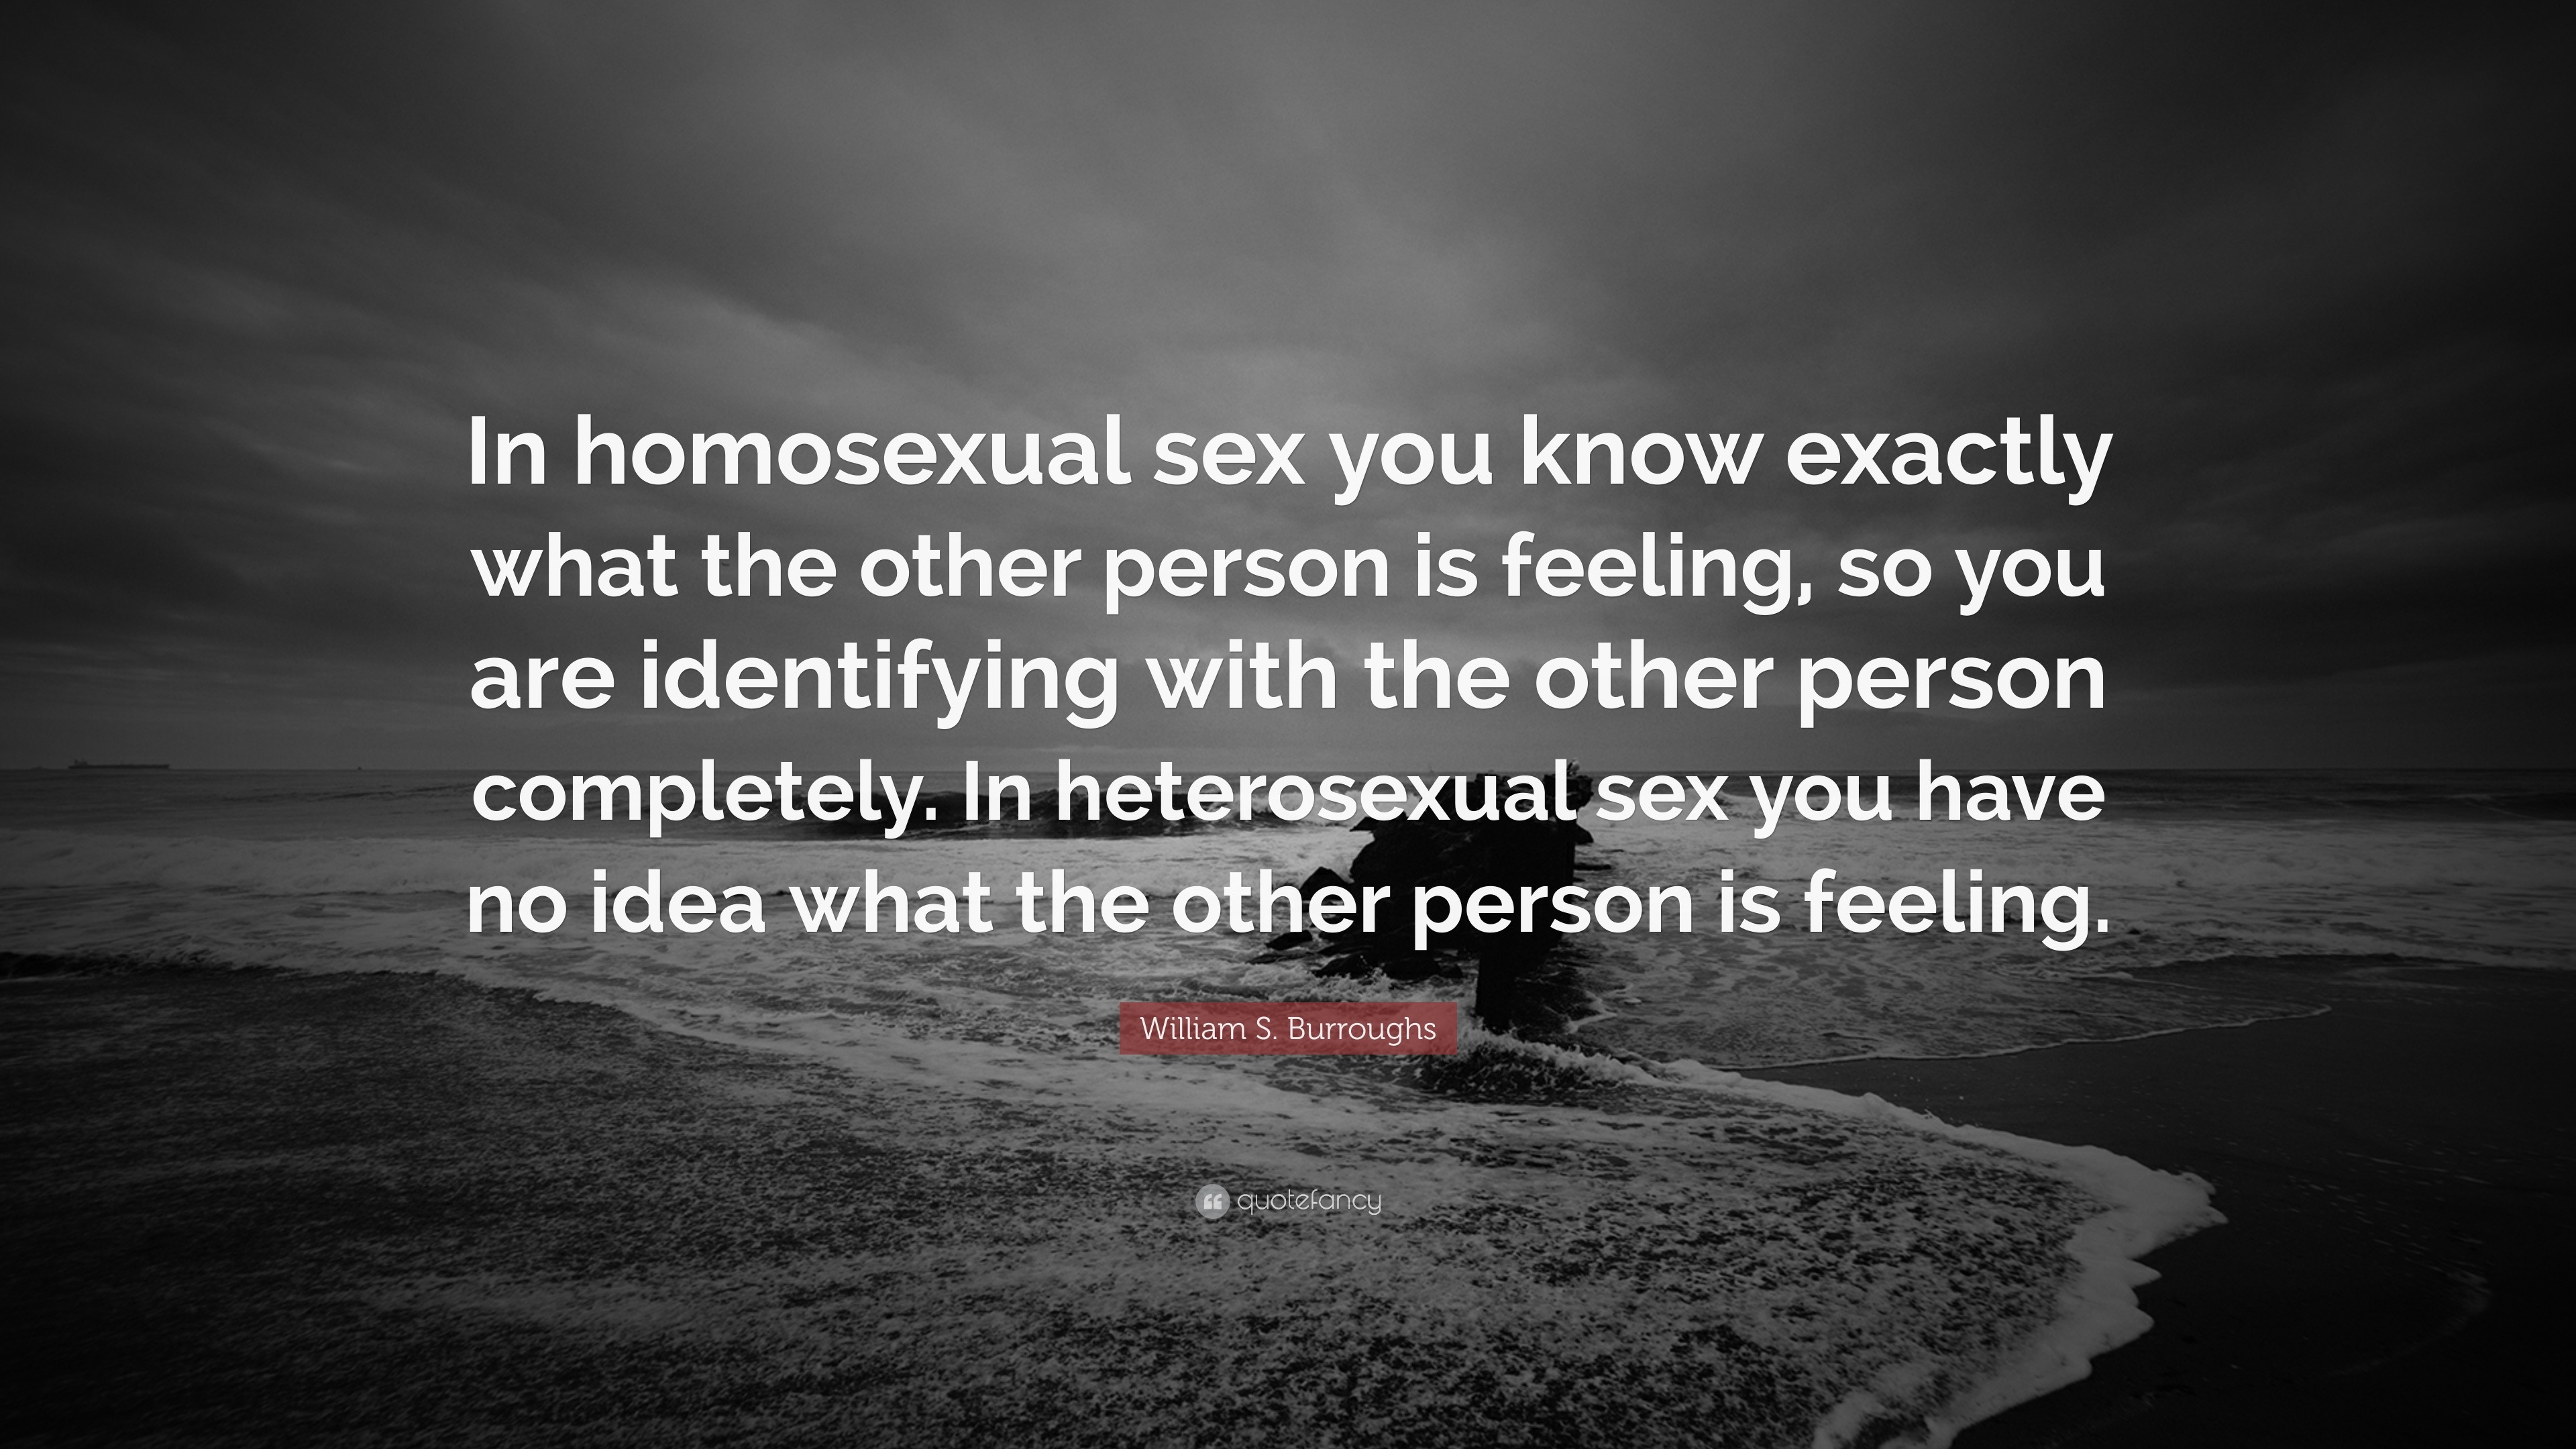 William S Burroughs Quote “in Homosexual Sex You Know Exactly What The Other Person Is Feeling 4671